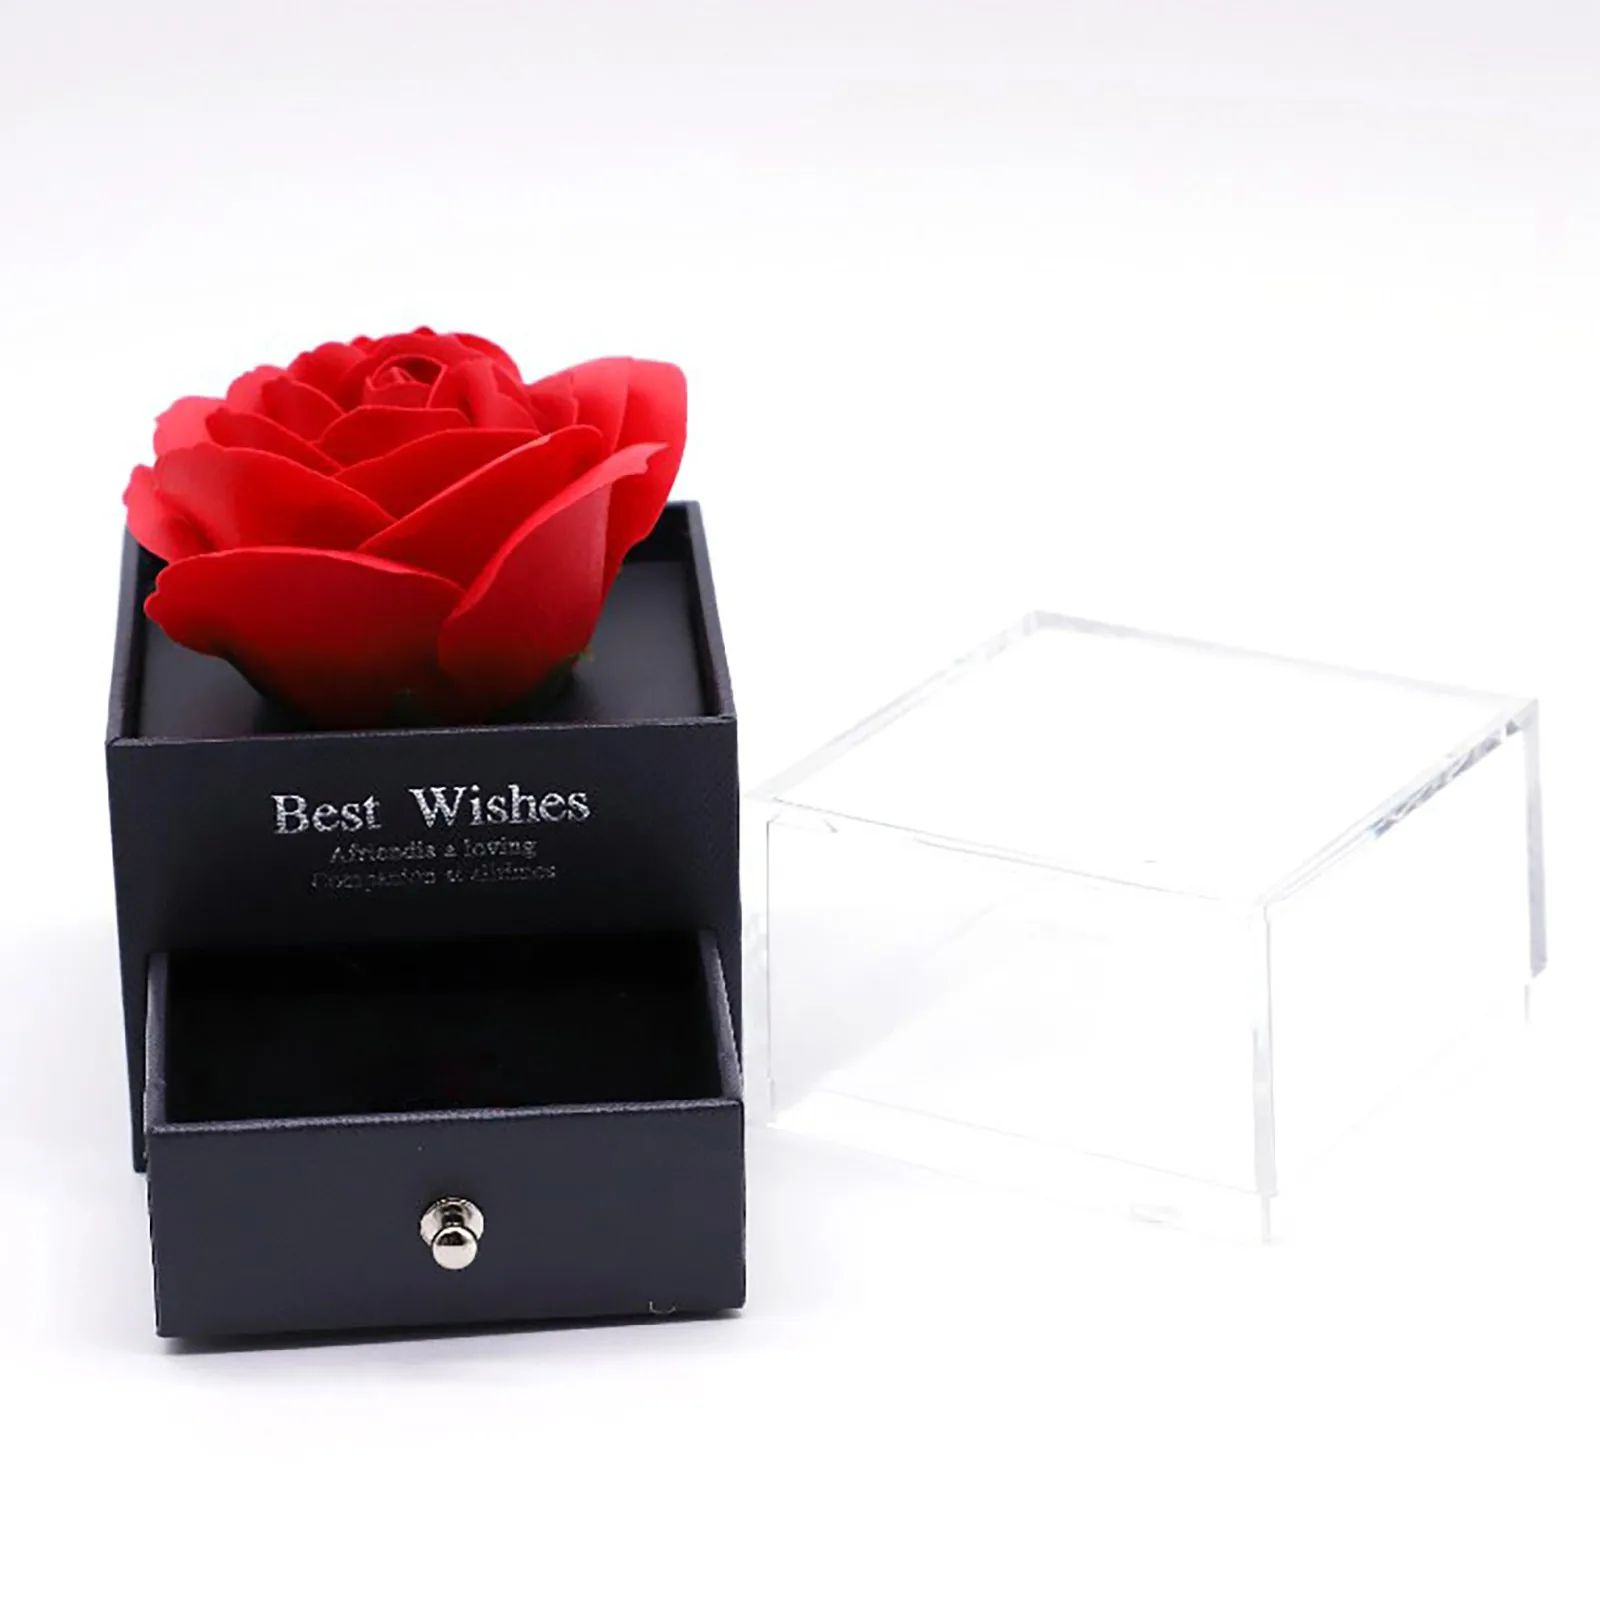 S7d4c845e966f4c239f849f60c2a733318 Everlasting Flower Gift Box Rose Preservation Box Mother's Day Handmade Rose Gif